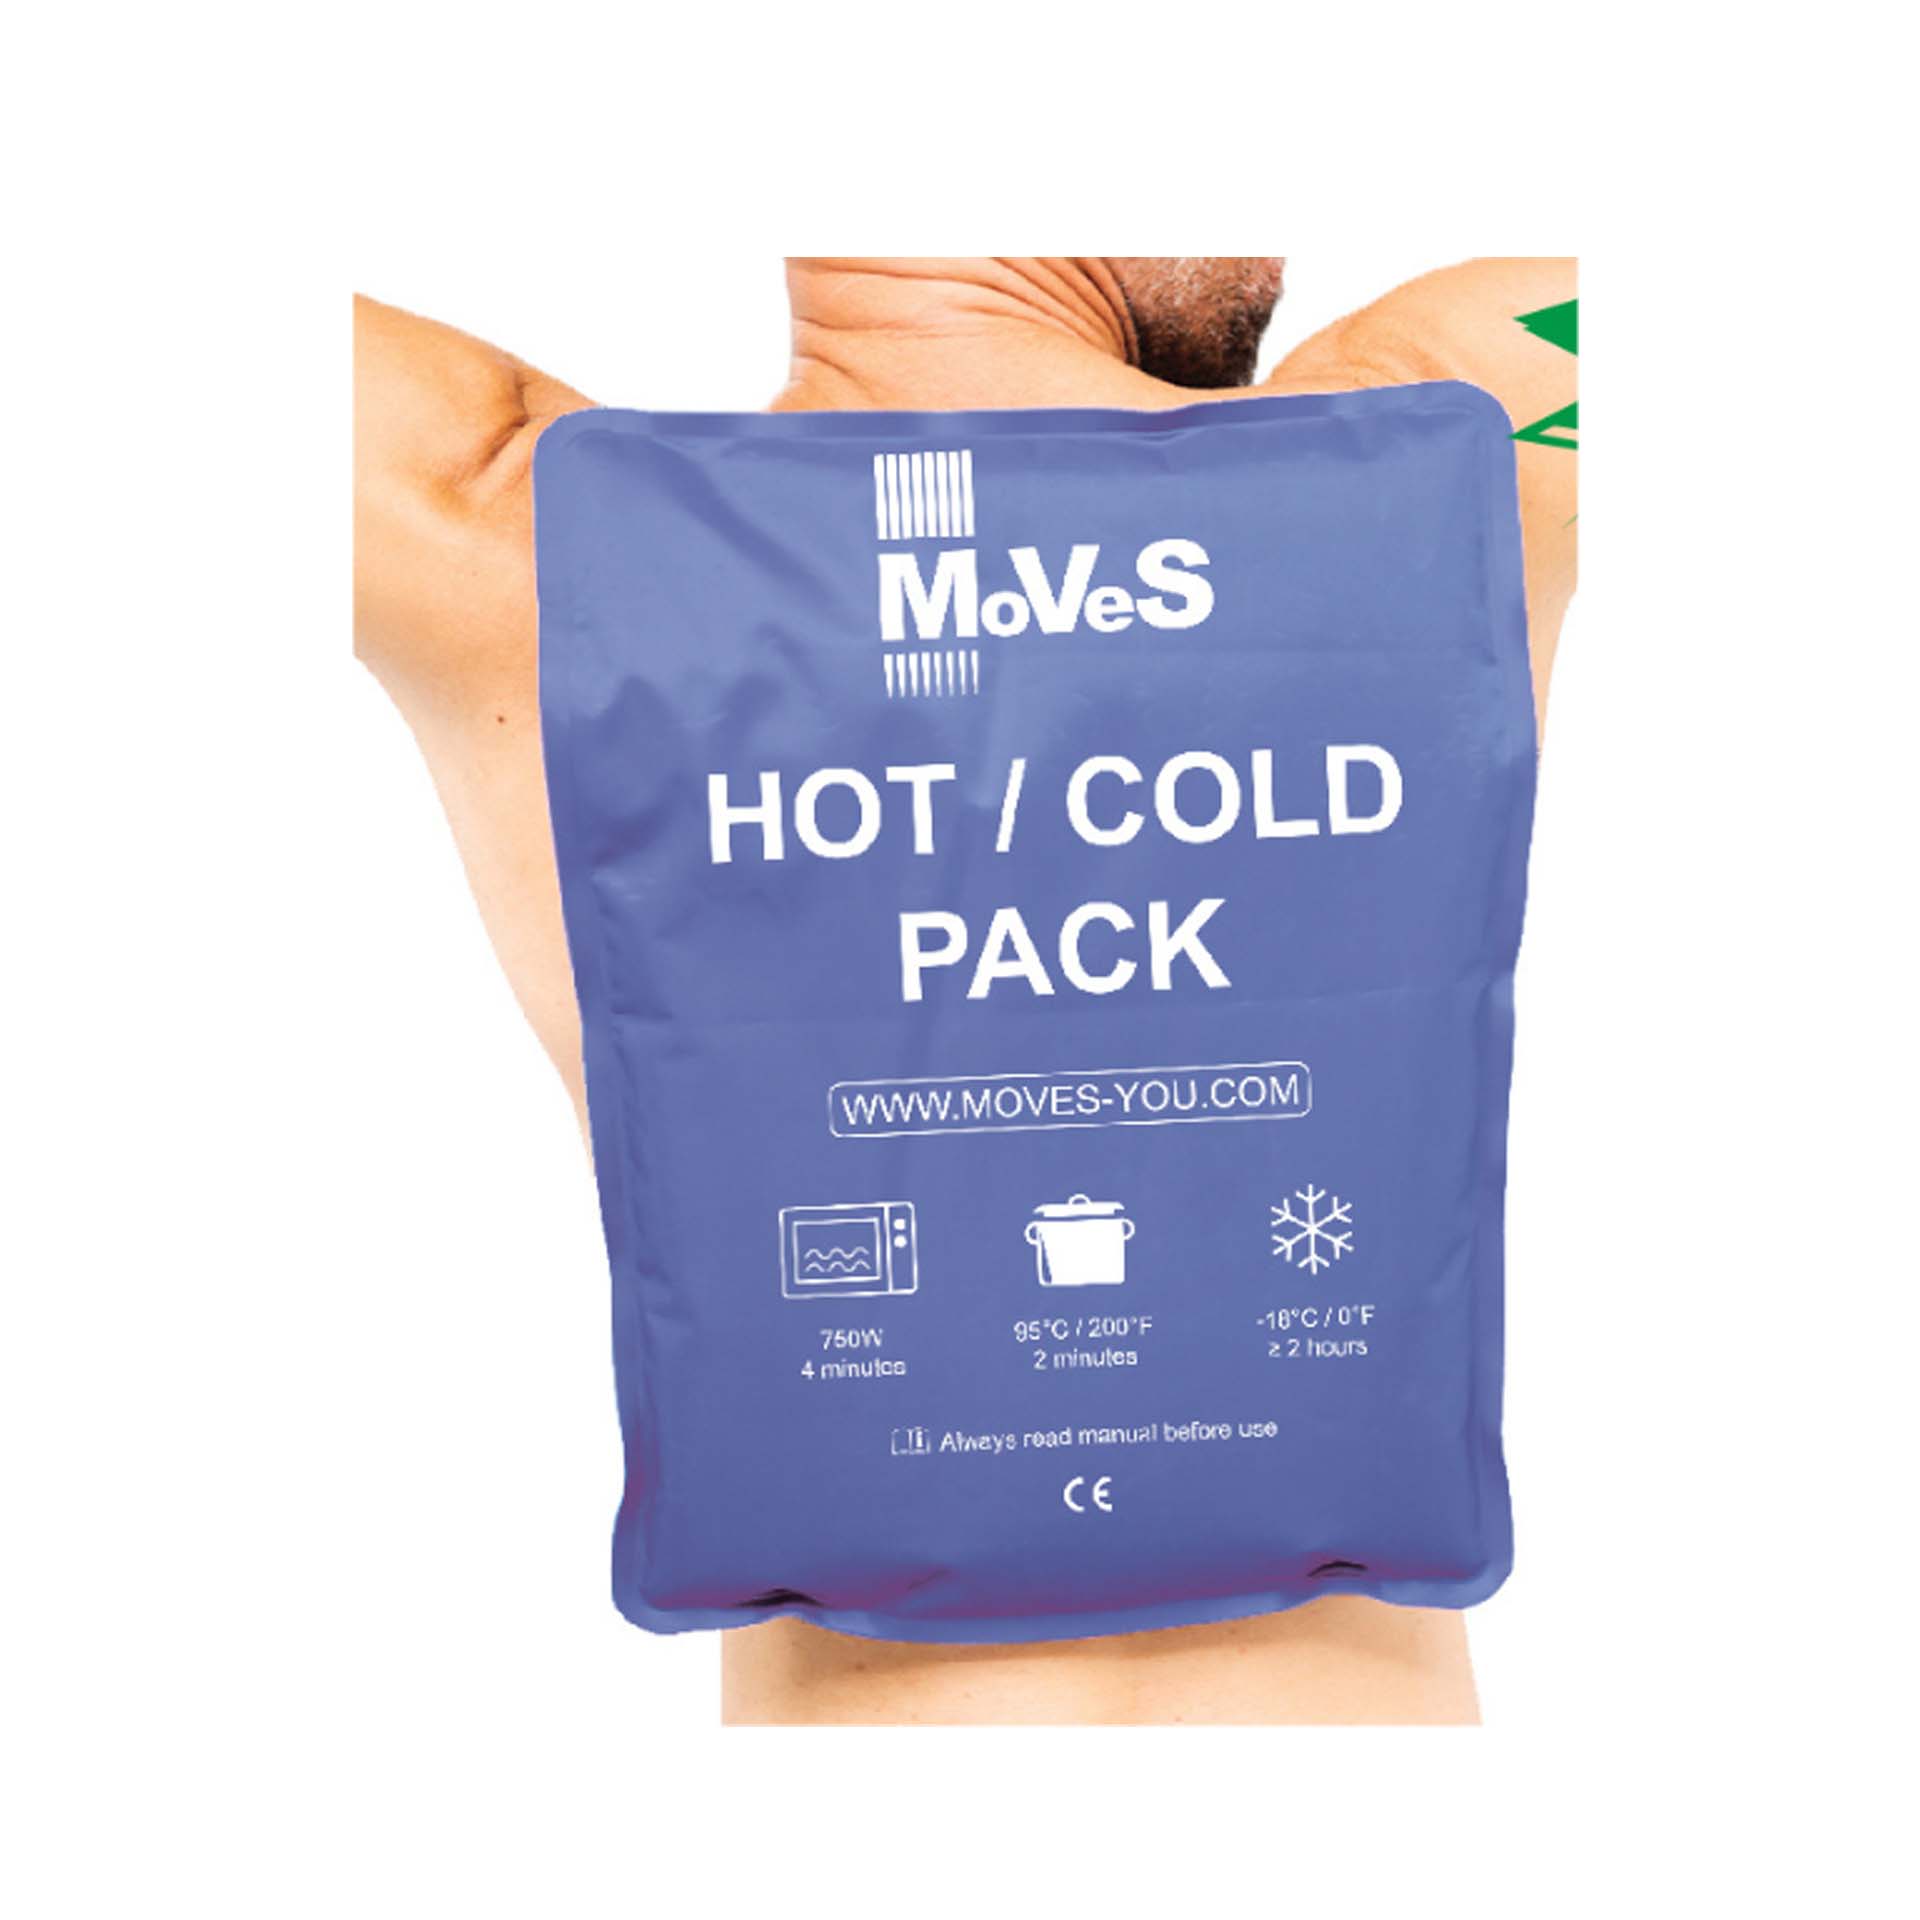 The picture shows MoVes Hot/Cold Pack Standard which is a demonstration.